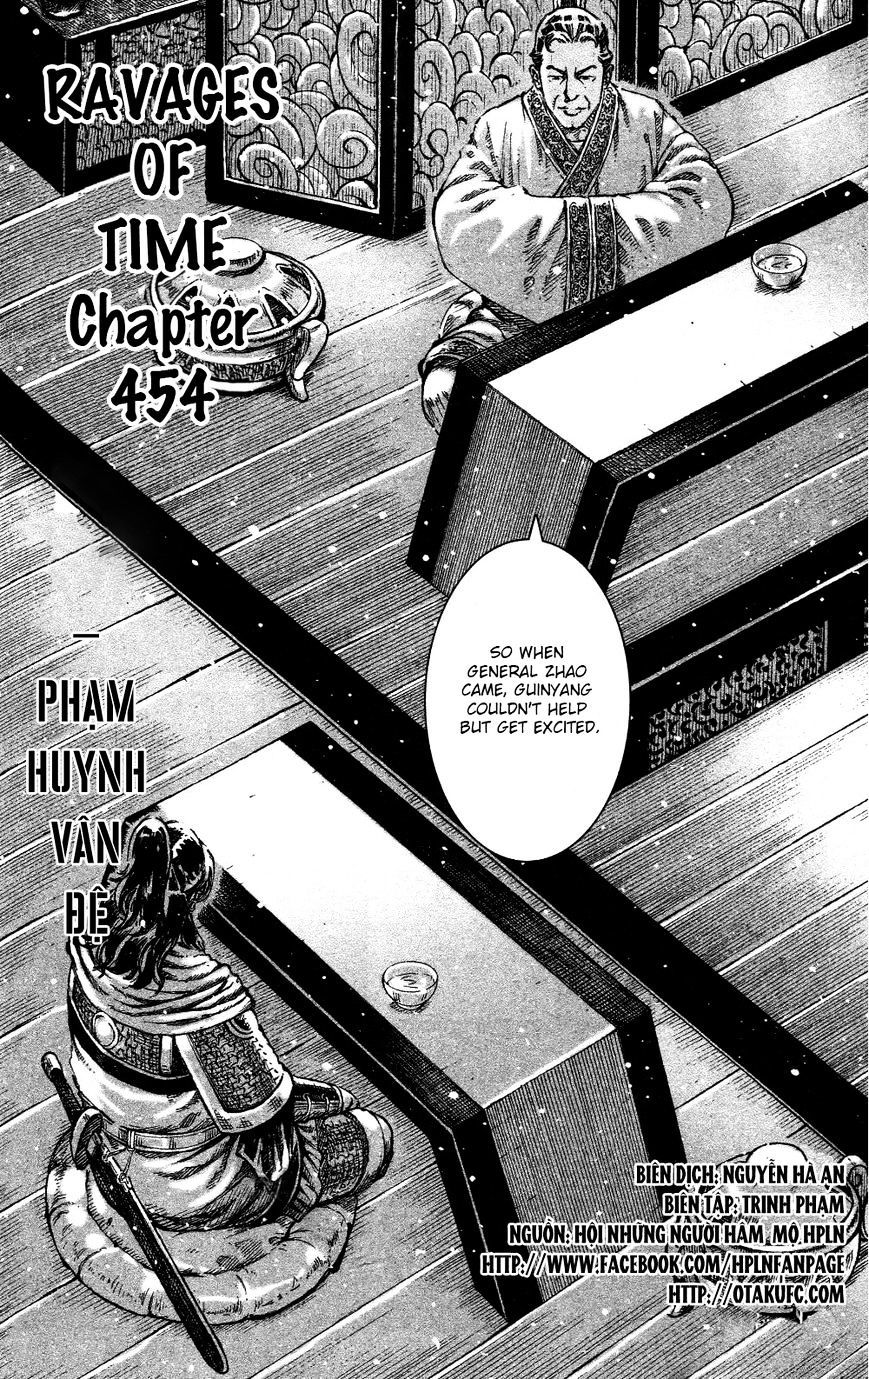 The Ravages Of Time Vol.45 Chapter 454 : The Brother Of Yun - Picture 1